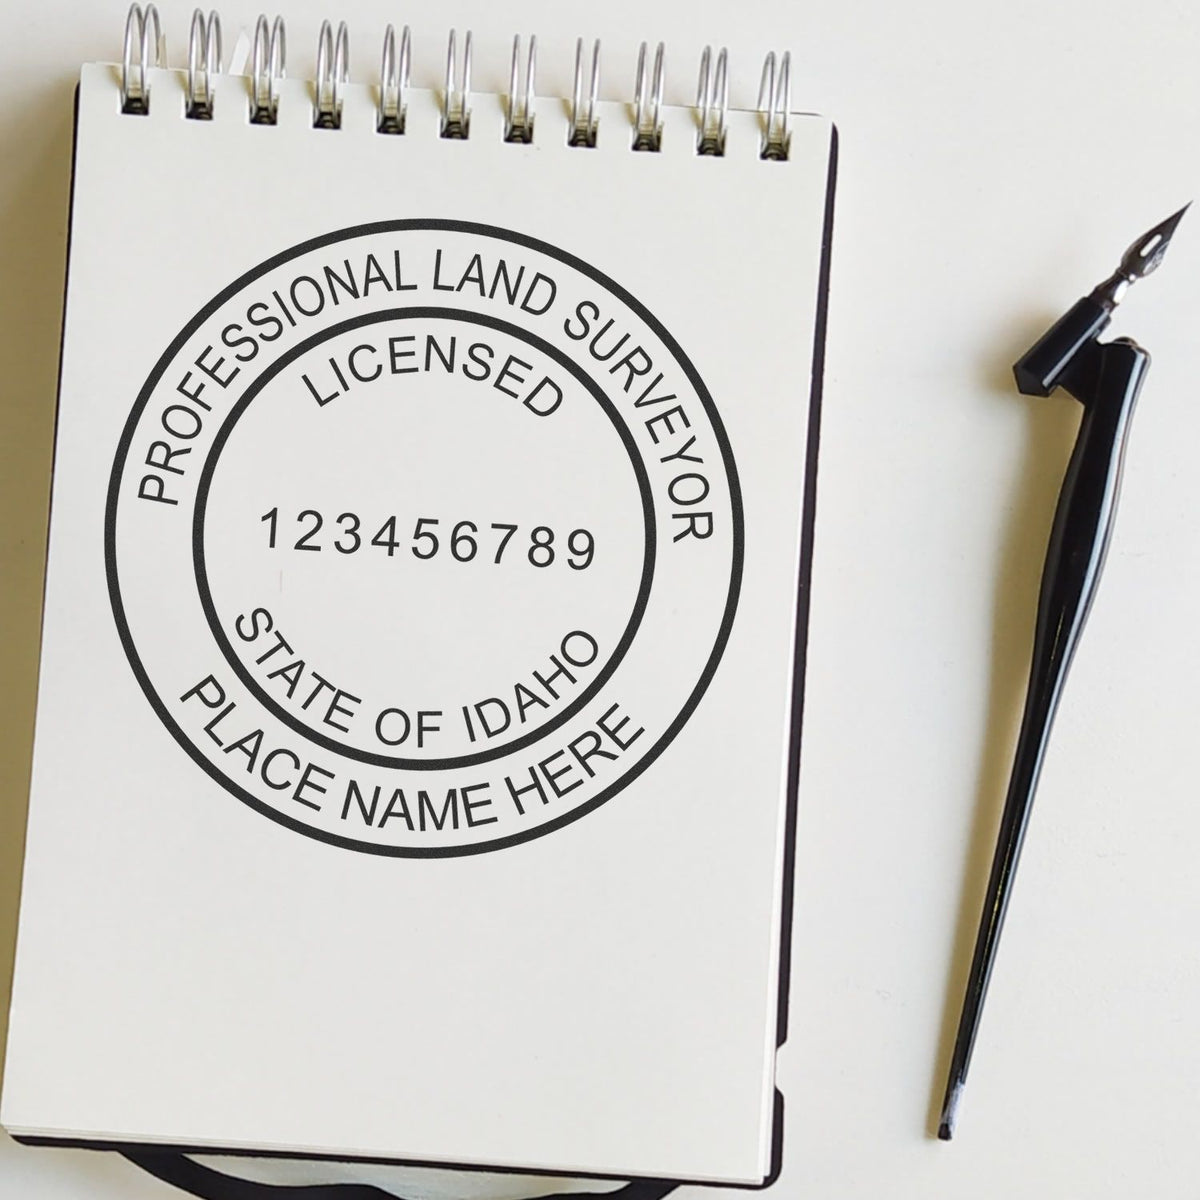 An alternative view of the Slim Pre-Inked Idaho Land Surveyor Seal Stamp stamped on a sheet of paper showing the image in use